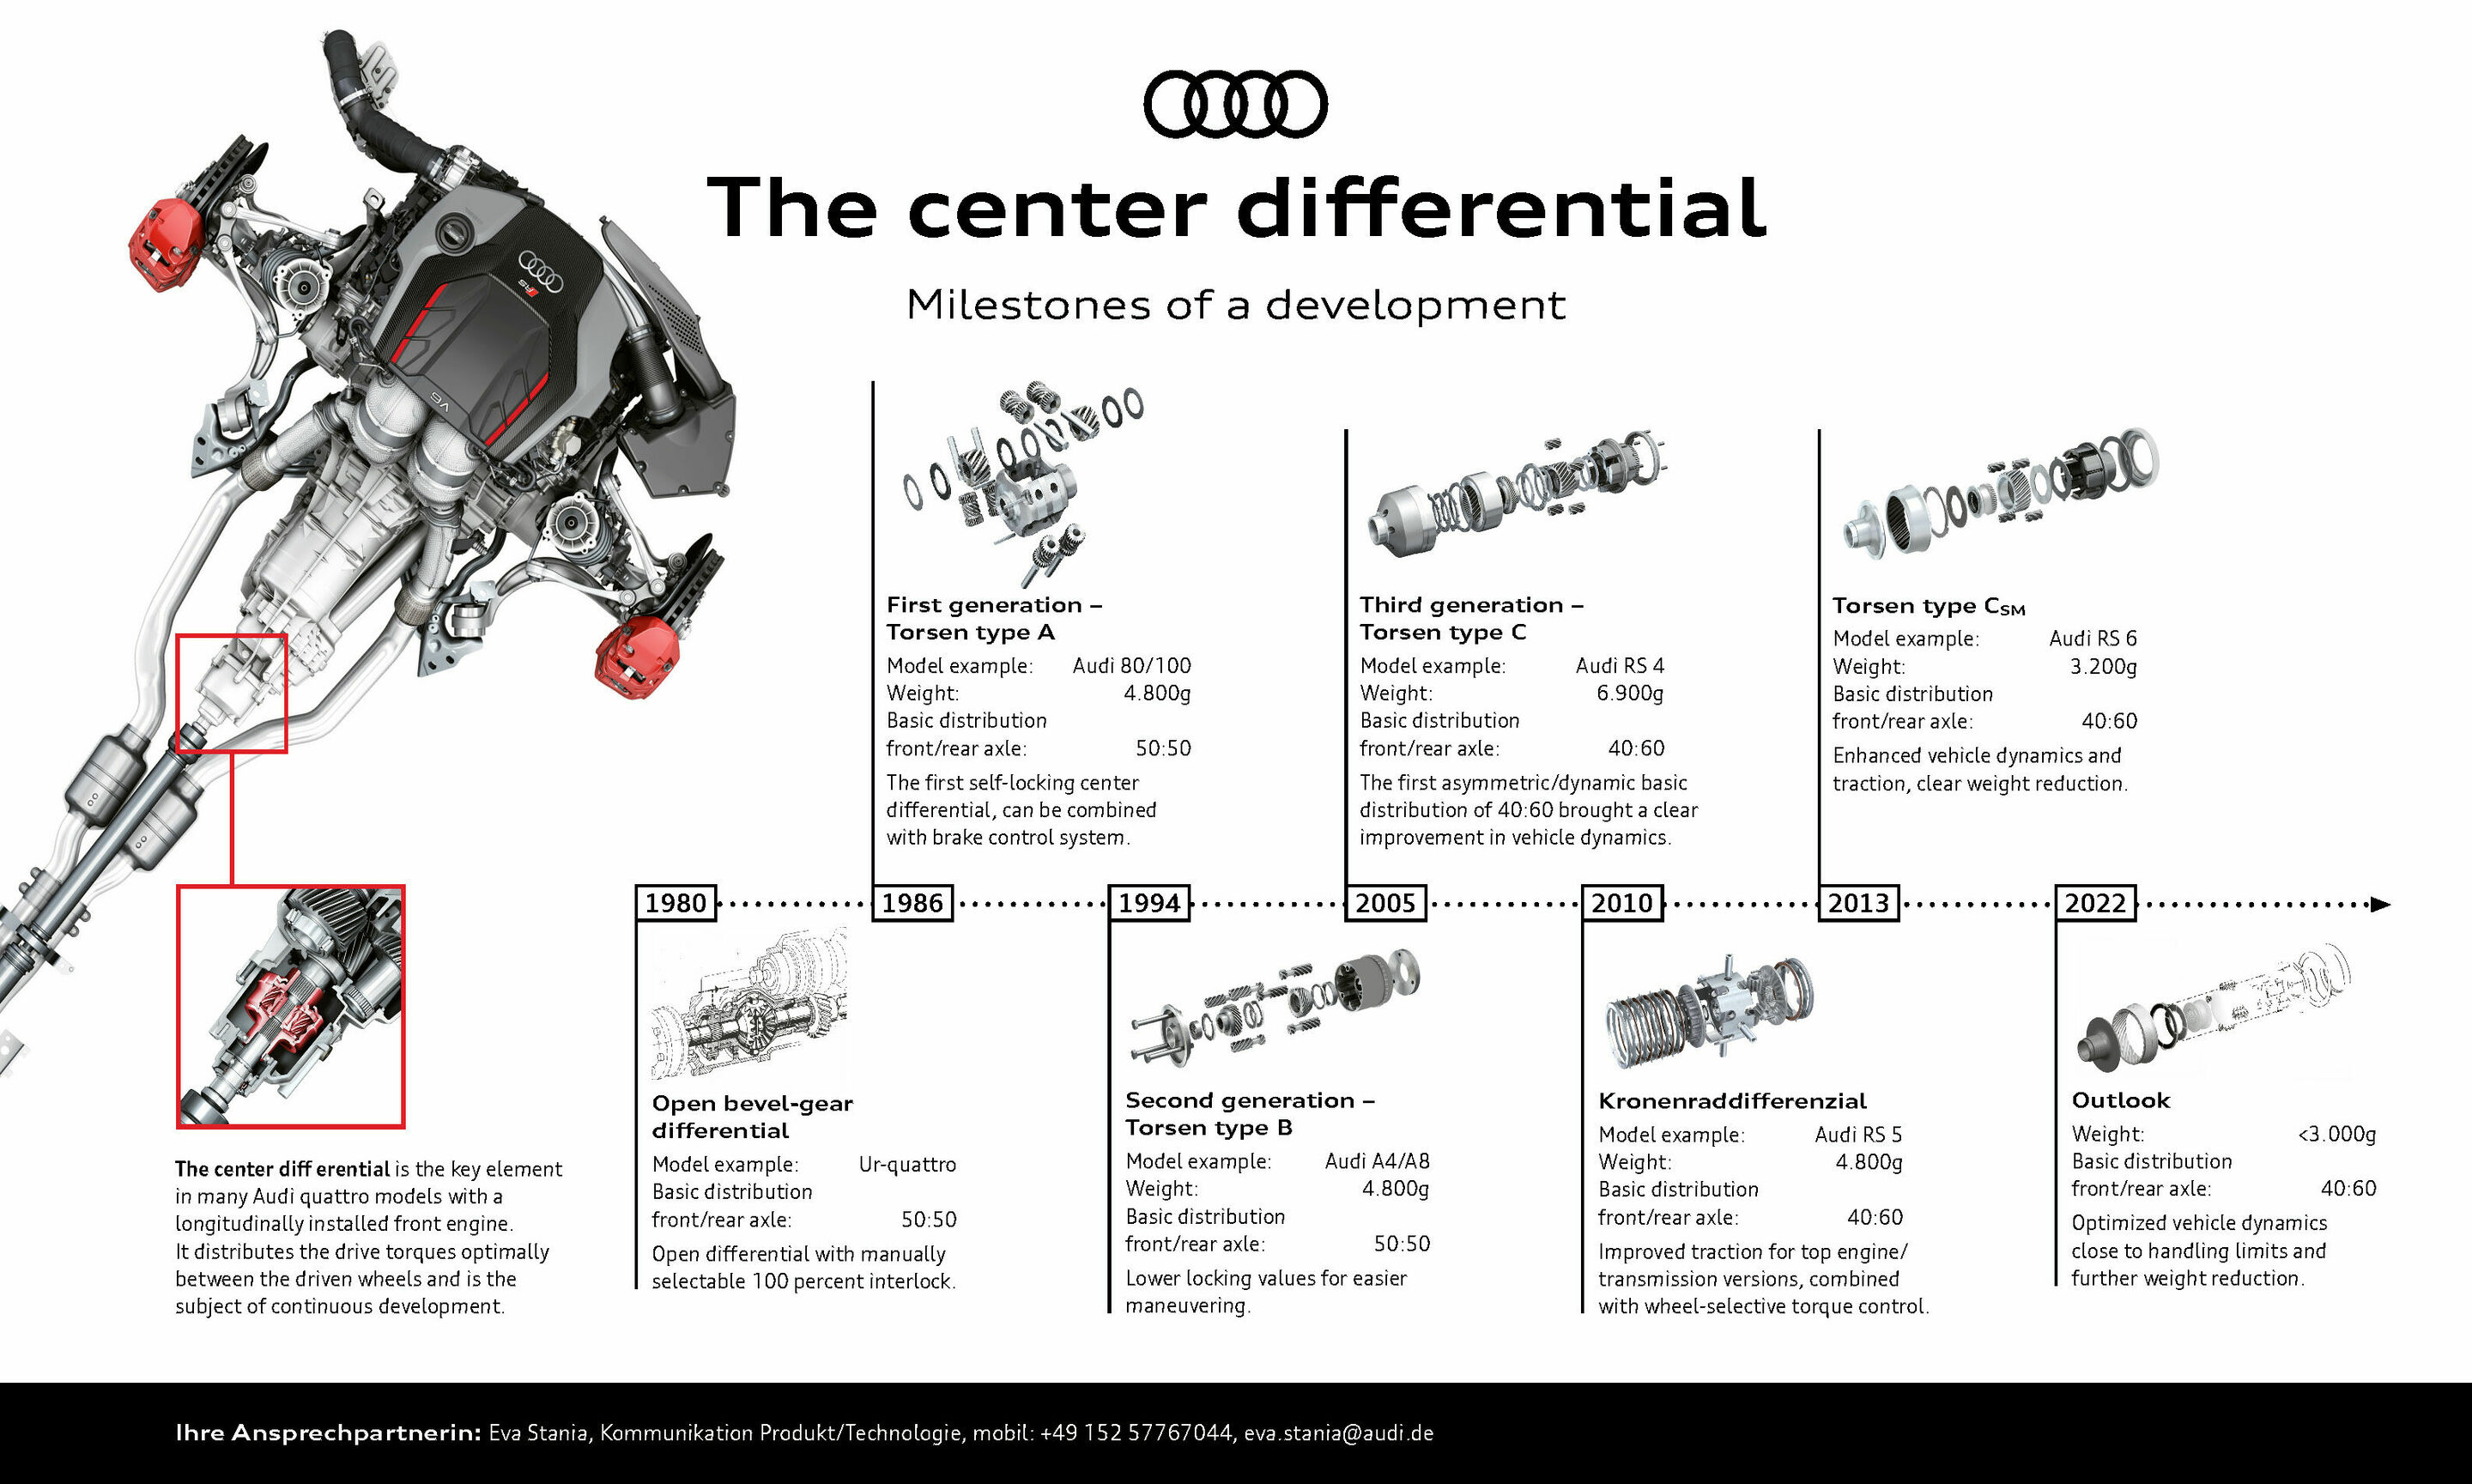 The center differential